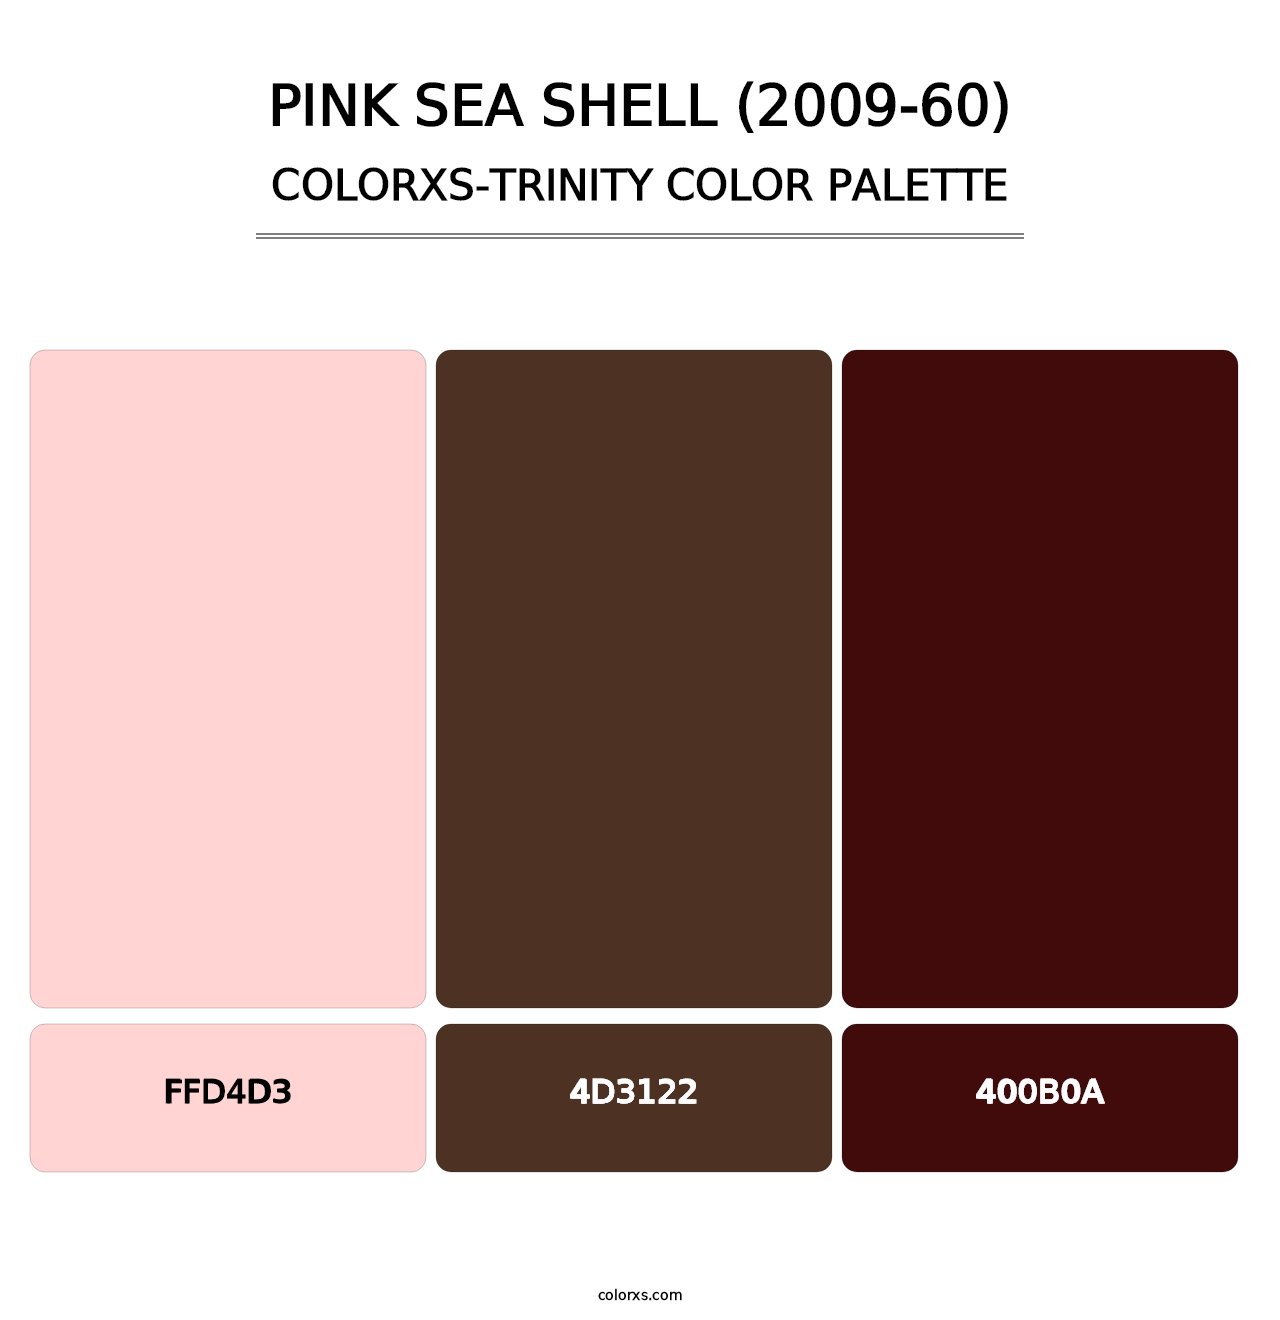 Pink Sea Shell (2009-60) - Colorxs Trinity Palette